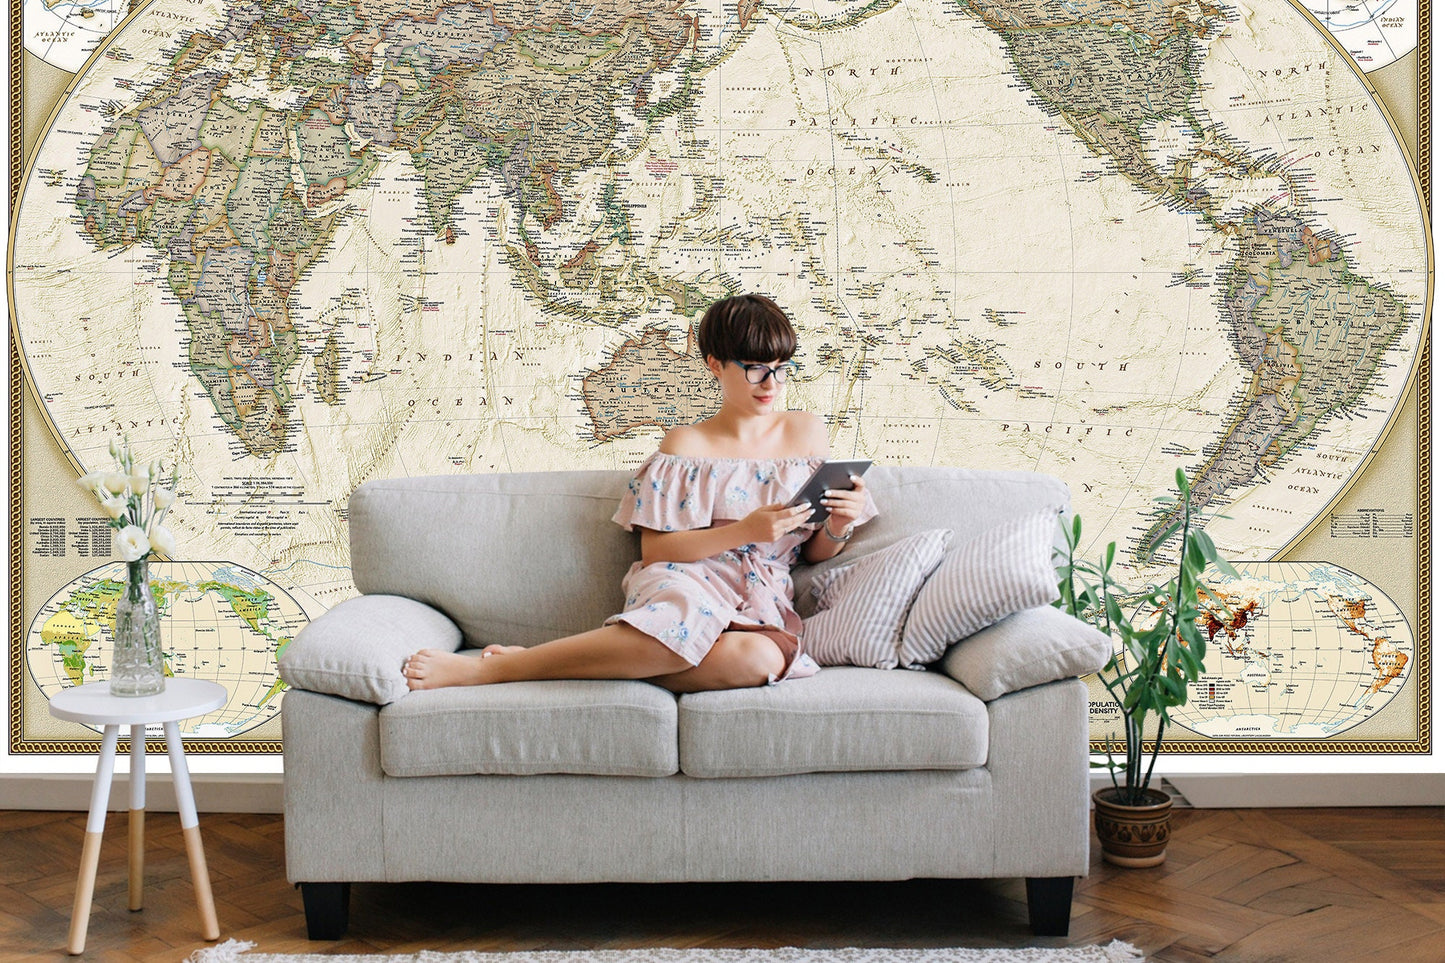 Vintage World Map Fabric Wallpaper Peel and Stick - Printed Wall Murals - Removable Wall Paper - WM002